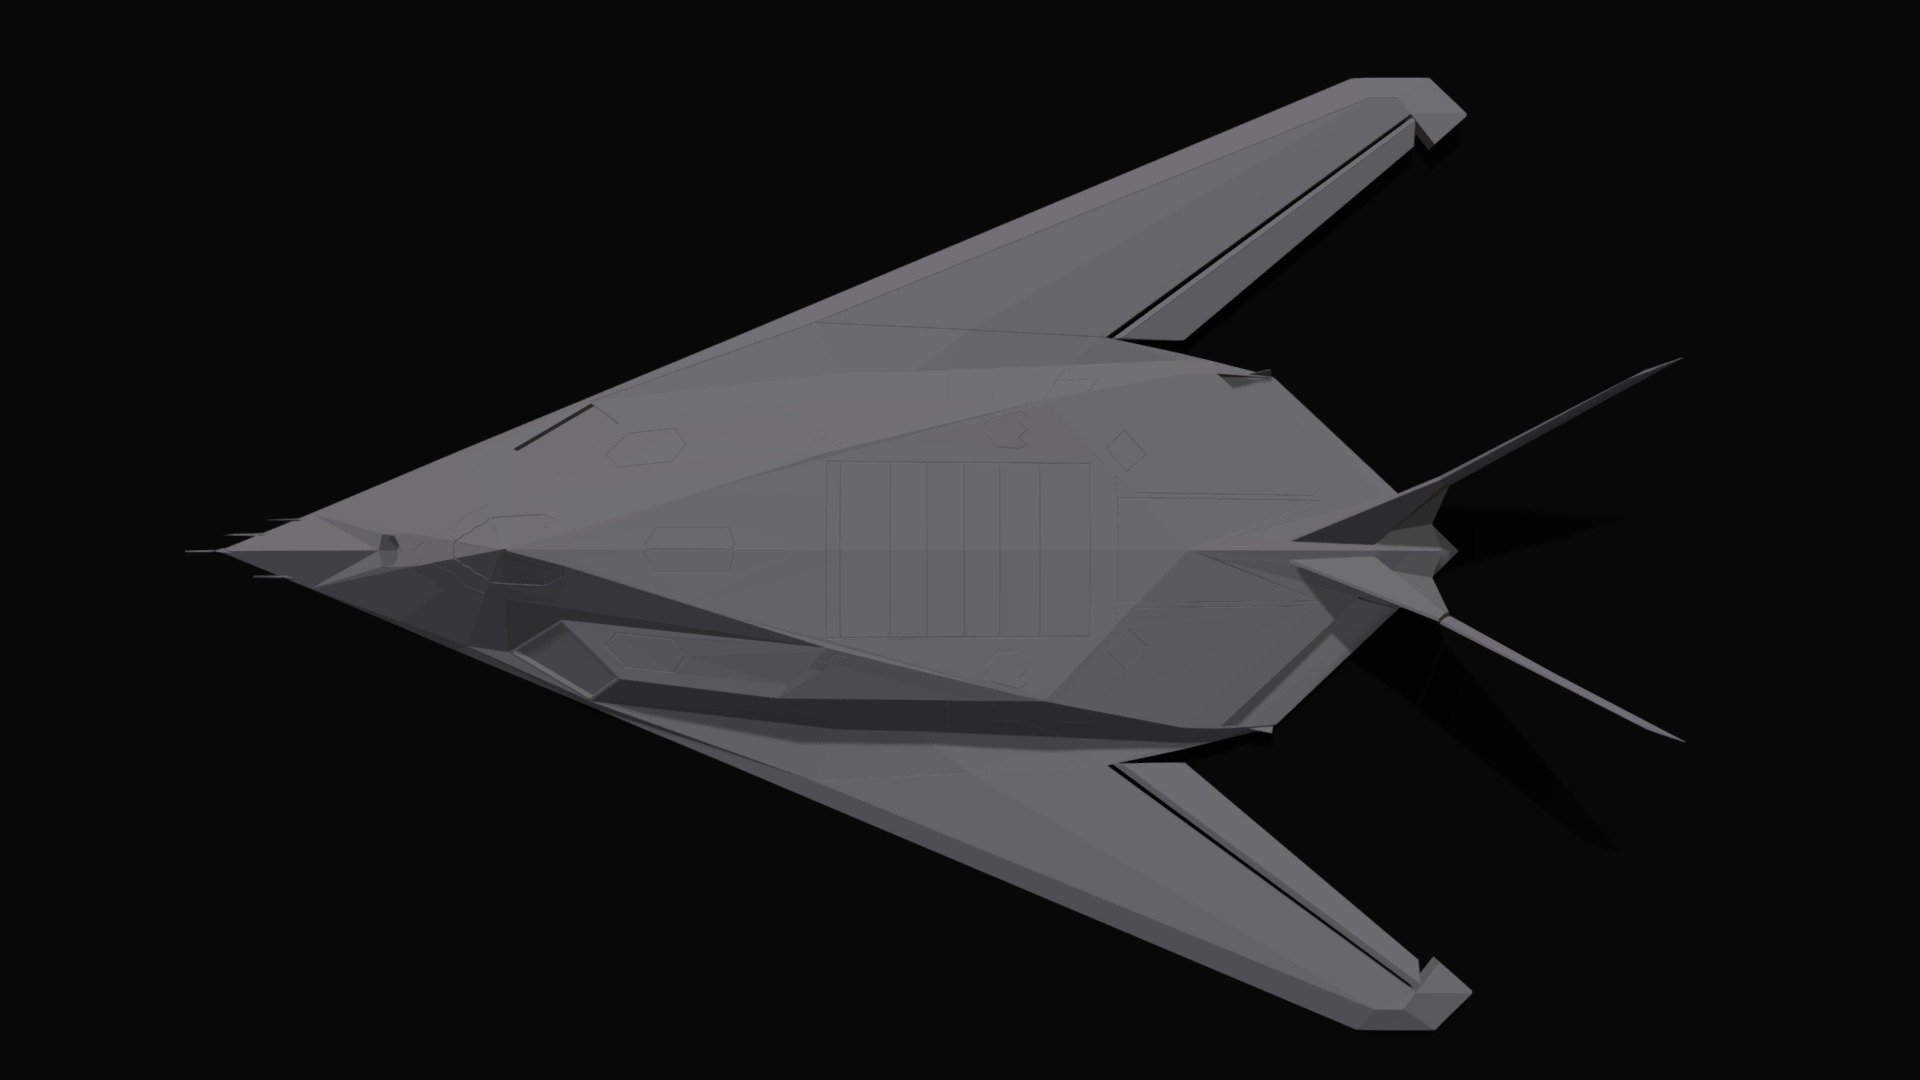 Lockheed F-117 Nighthawk Stealth fighter bomber Low-poly 3D model

What you get: 1 x max 2015 scanline file 1 x max 2015 V-ray file 1 x OBJ export- tested in max 1 x Blender file

The model is presented with a grey standard material ans is therefor un-textured or not textured, Please let me know what you think - Lockheed F-117 Nighthawk Stealth fighter bomber - Buy Royalty Free 3D model by 3D Content Online (@hknoblauch) 3d model